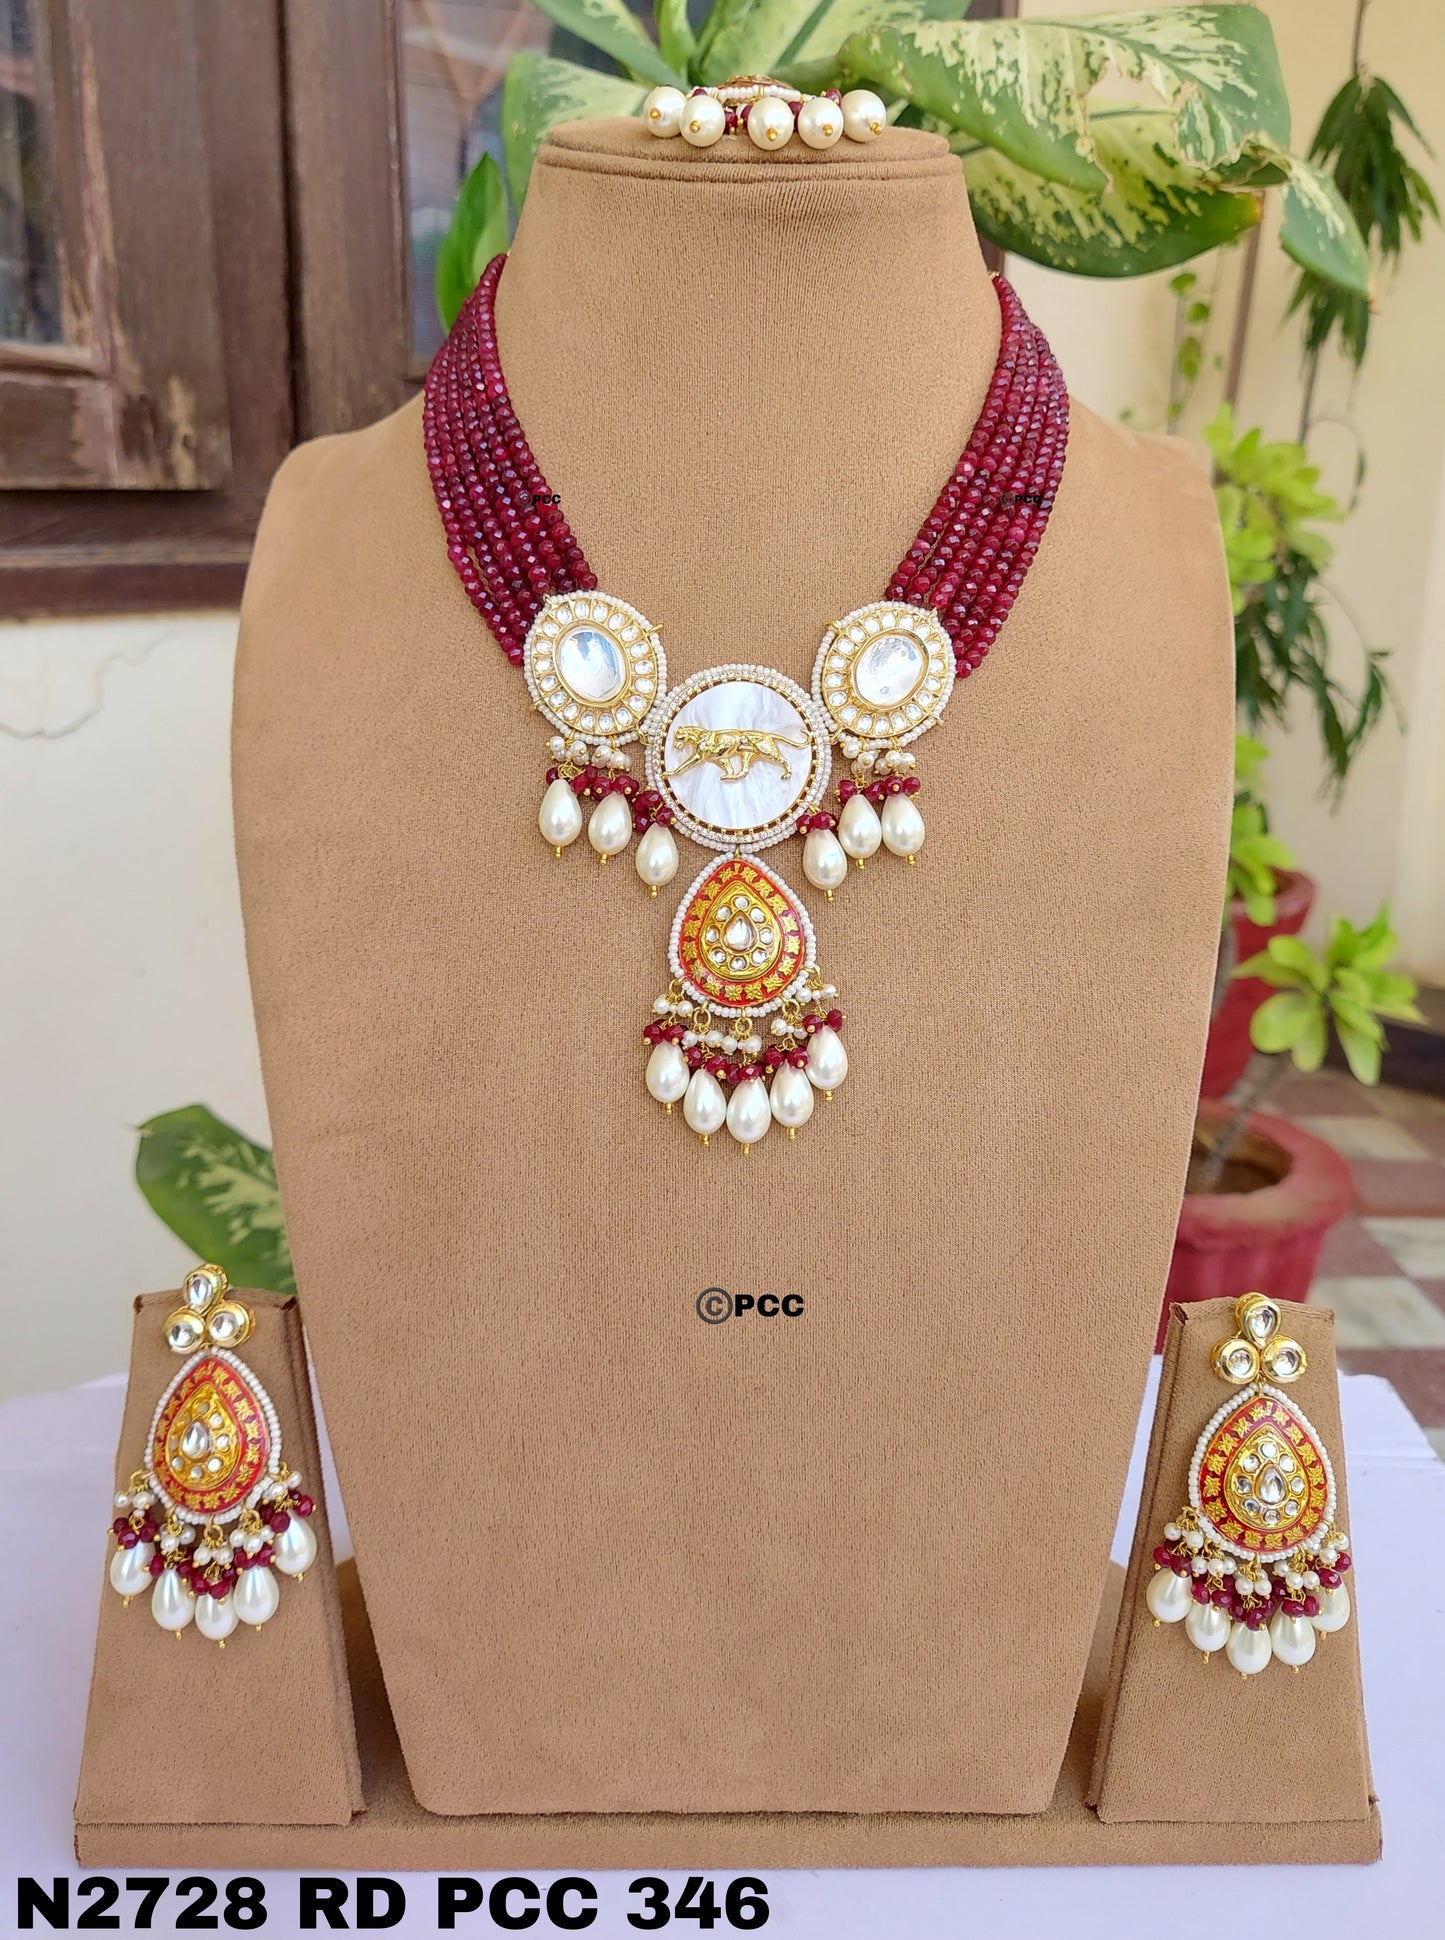 Radiant Charms Designer Necklace set with Earrings